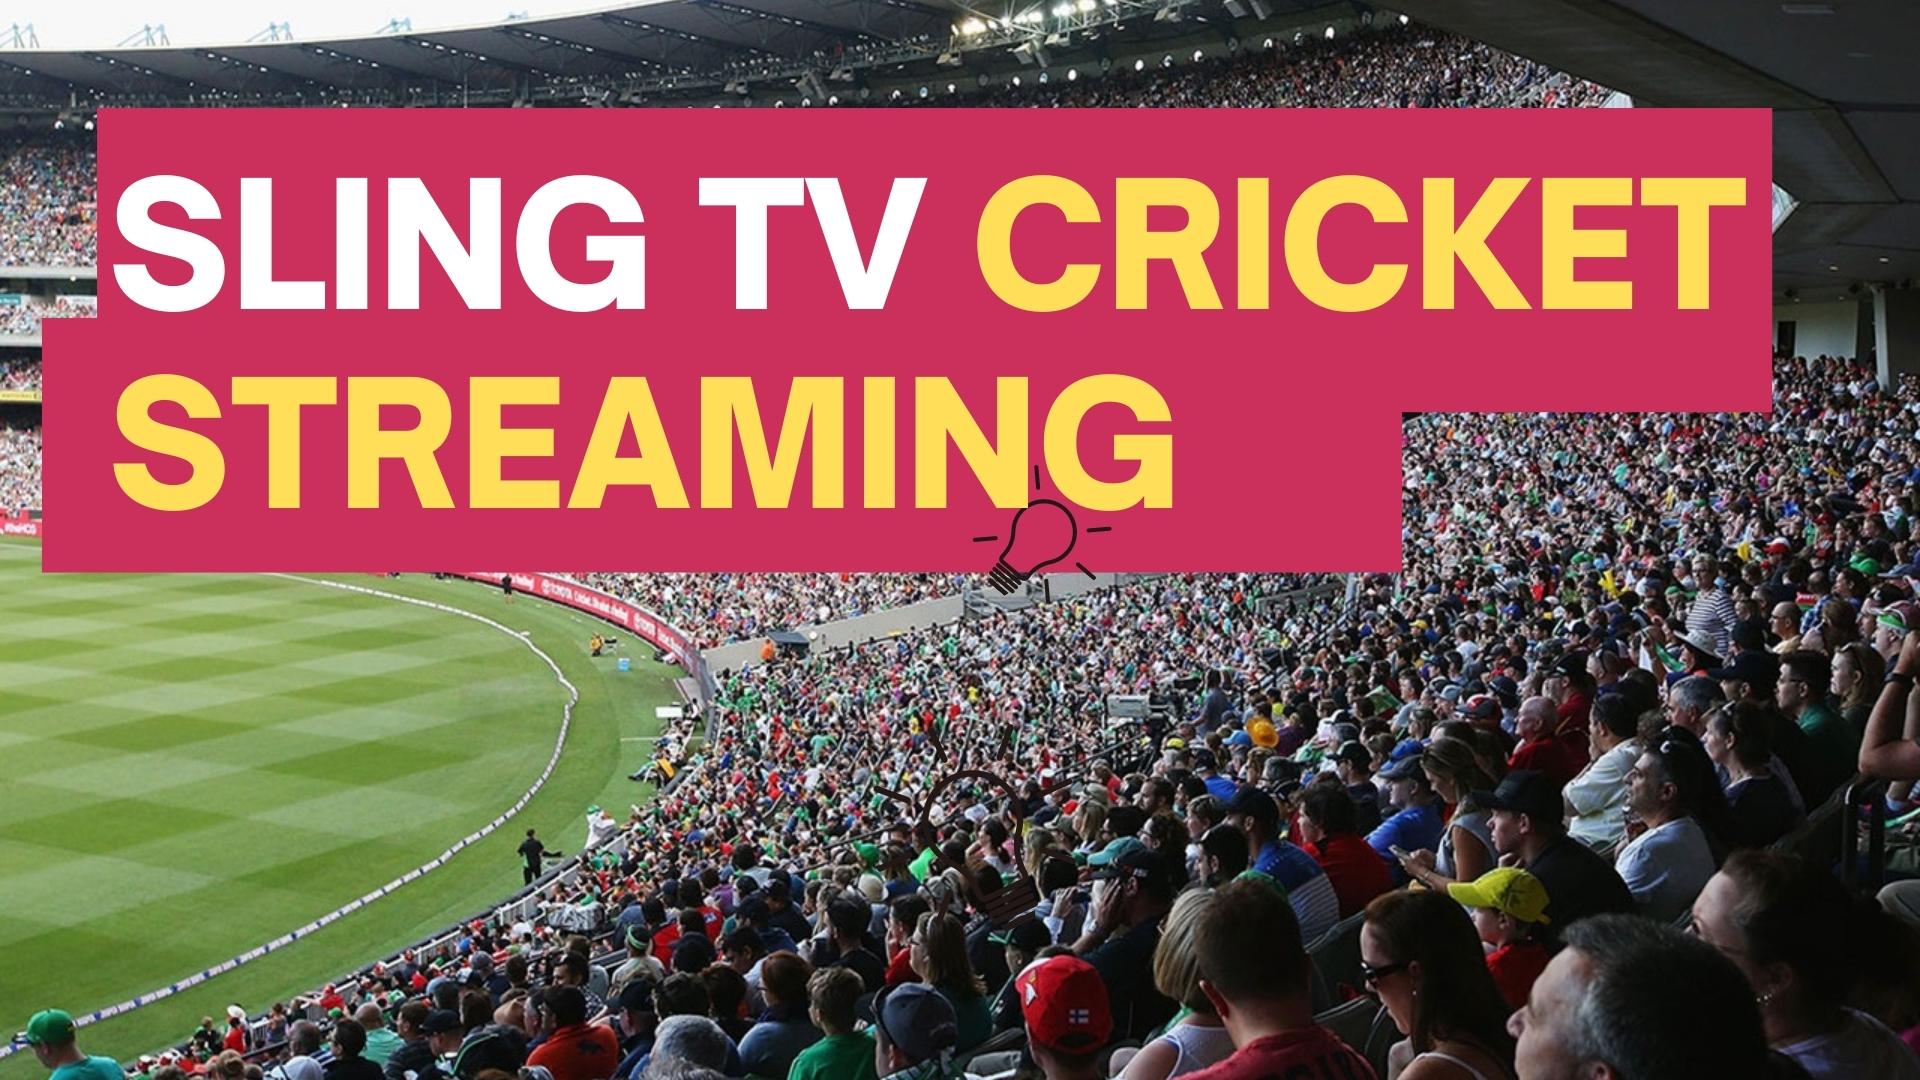 Watch Sling TV Live Cricket Streaming on Mobile and TV - Sling TV FREE Trial and Discounts